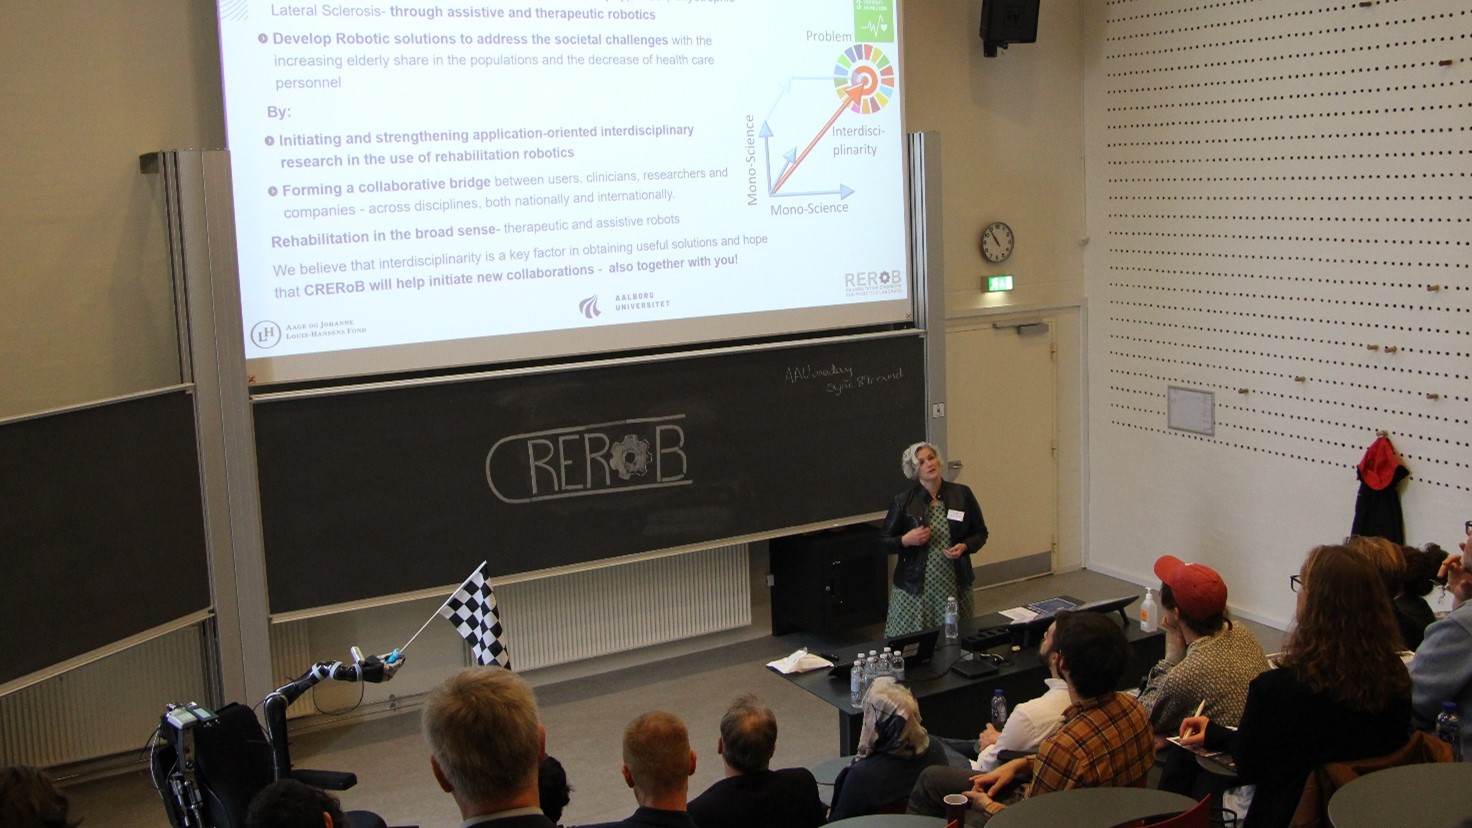 A photograph of the Head of Center, Lotte Struijk, giving her opening presentation at the opening seminar for the Center of Rehabilitation Robotics.